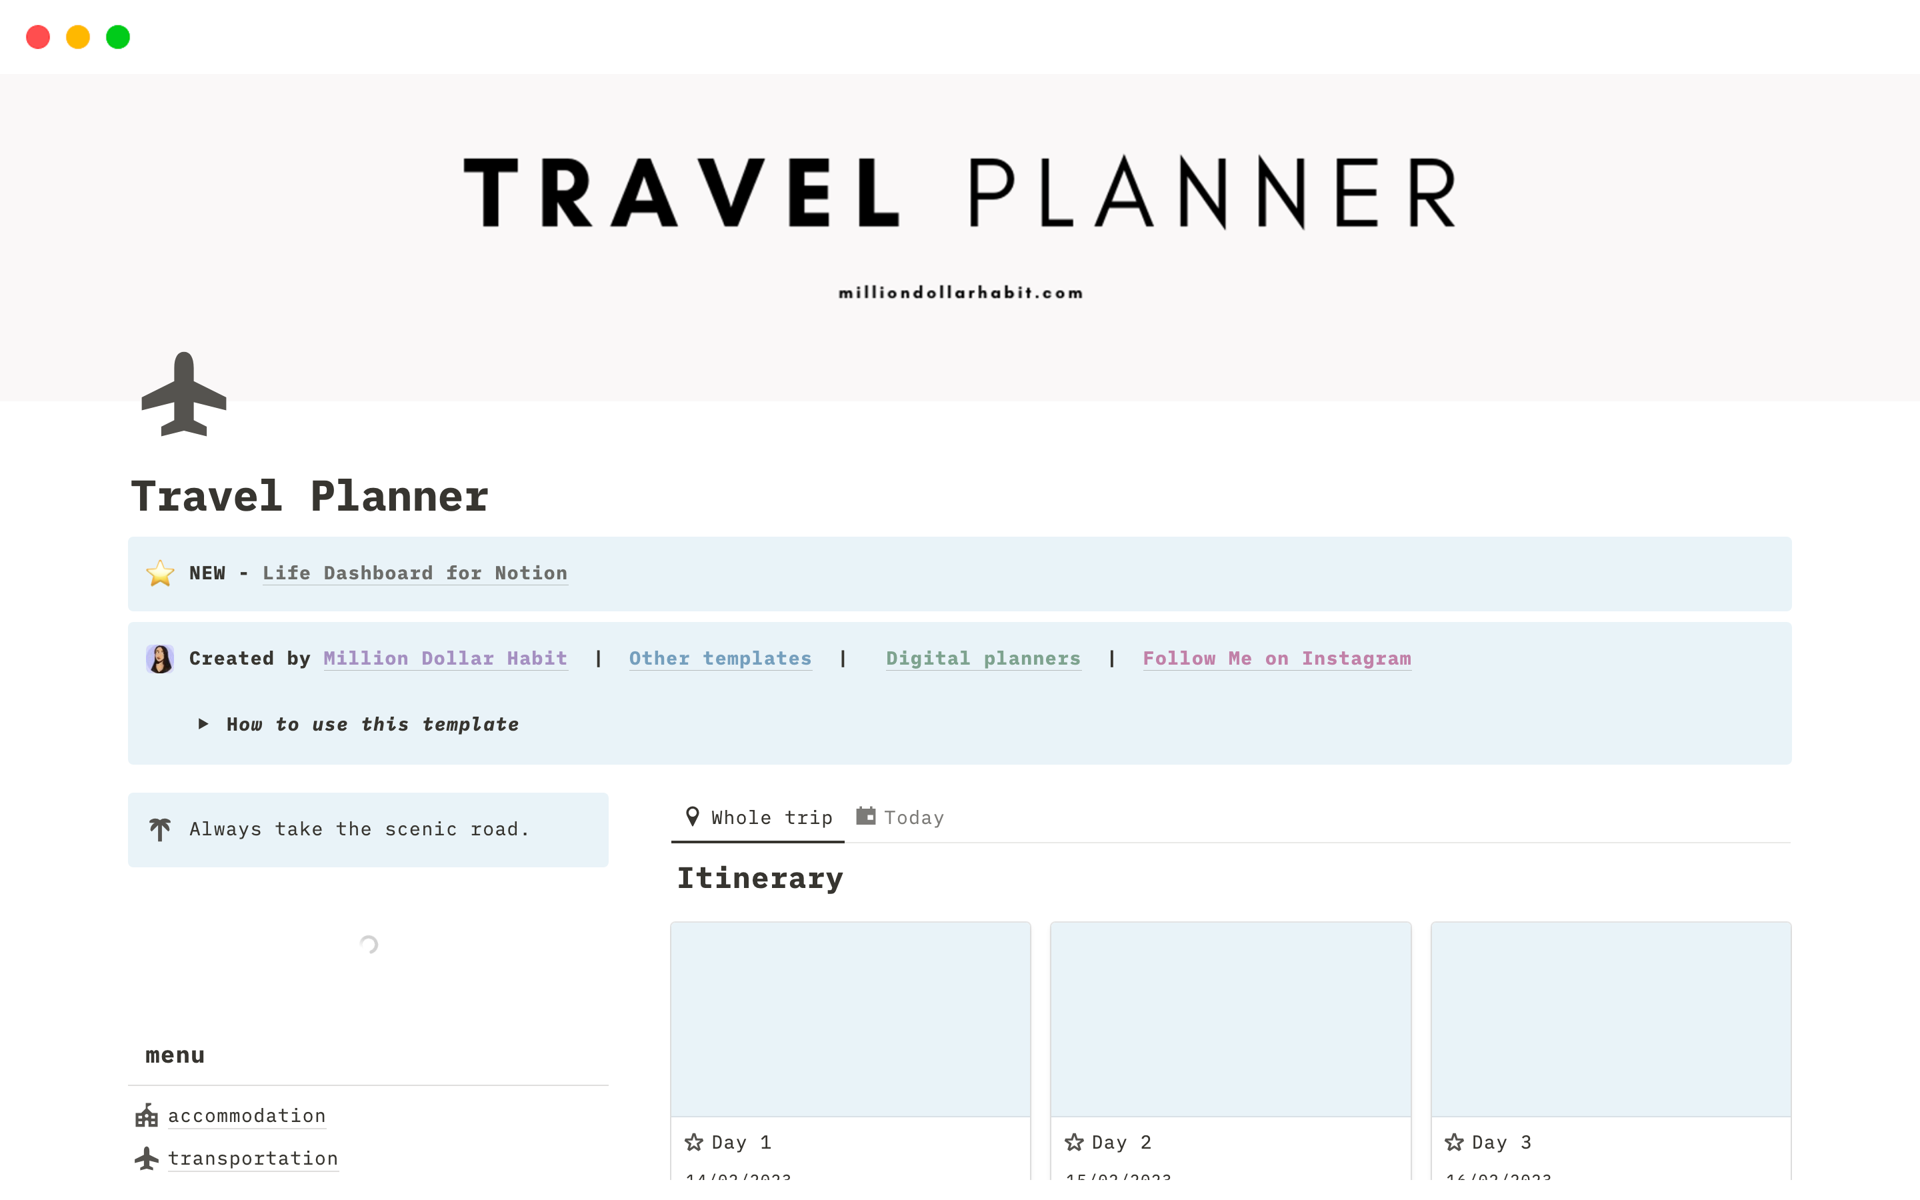 This template features a travel planner dashboard and is designed to help travelers like you stay organized and efficient while planning your trips.